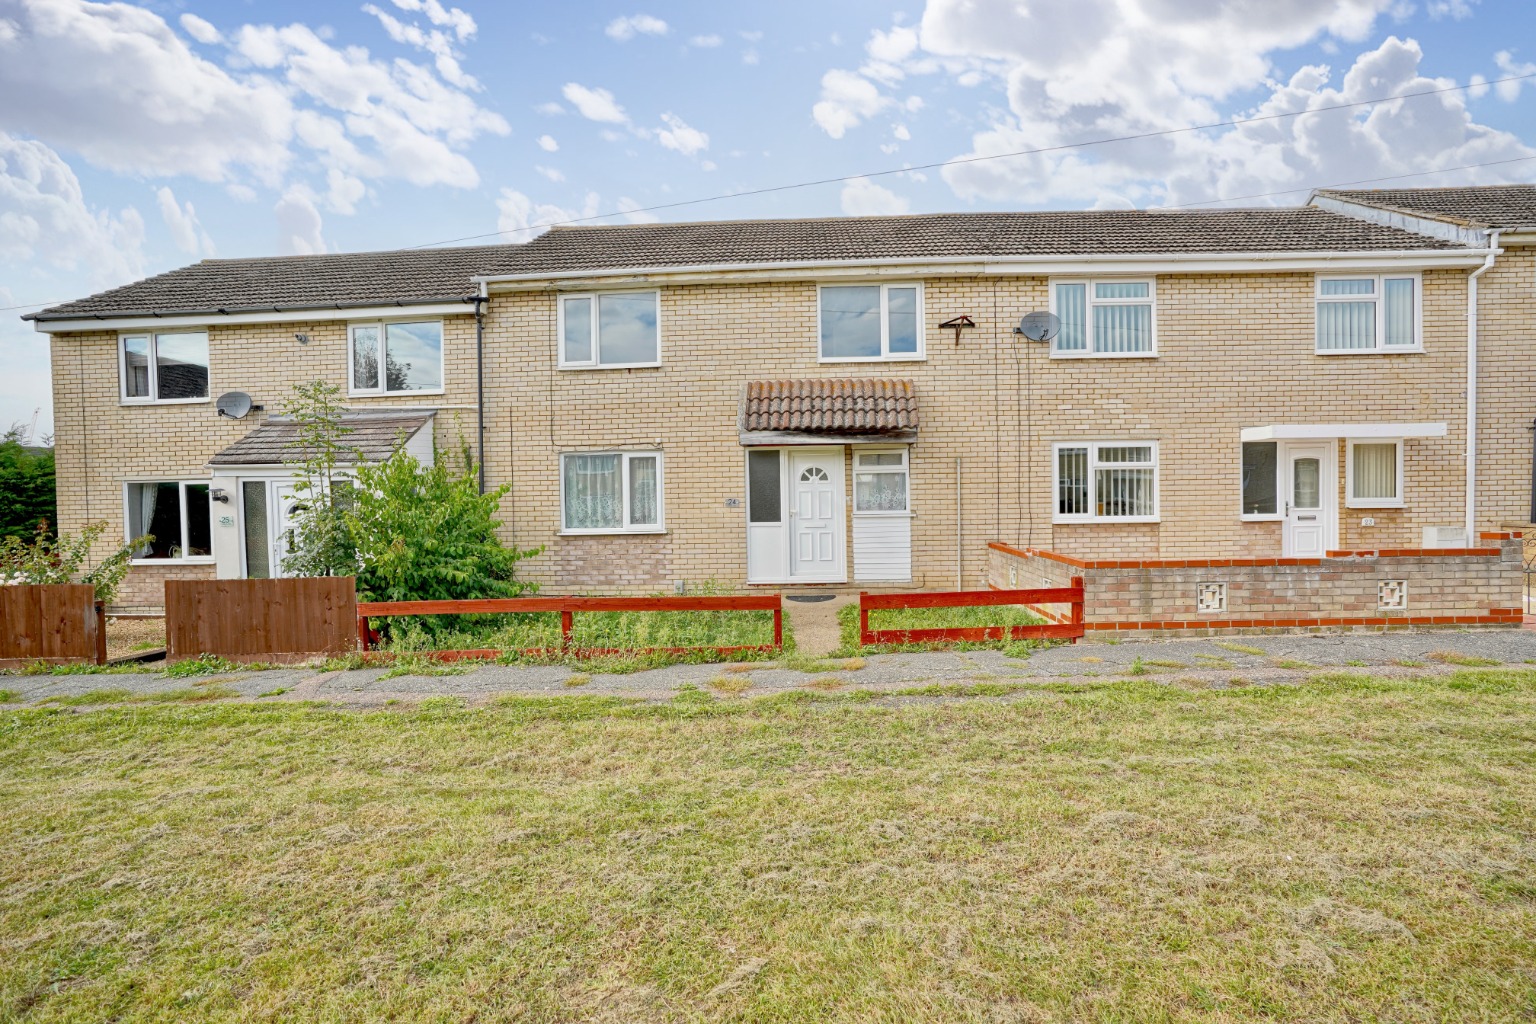 3 bed terraced house for sale in Shelley Close, Huntingdon - Property Image 1